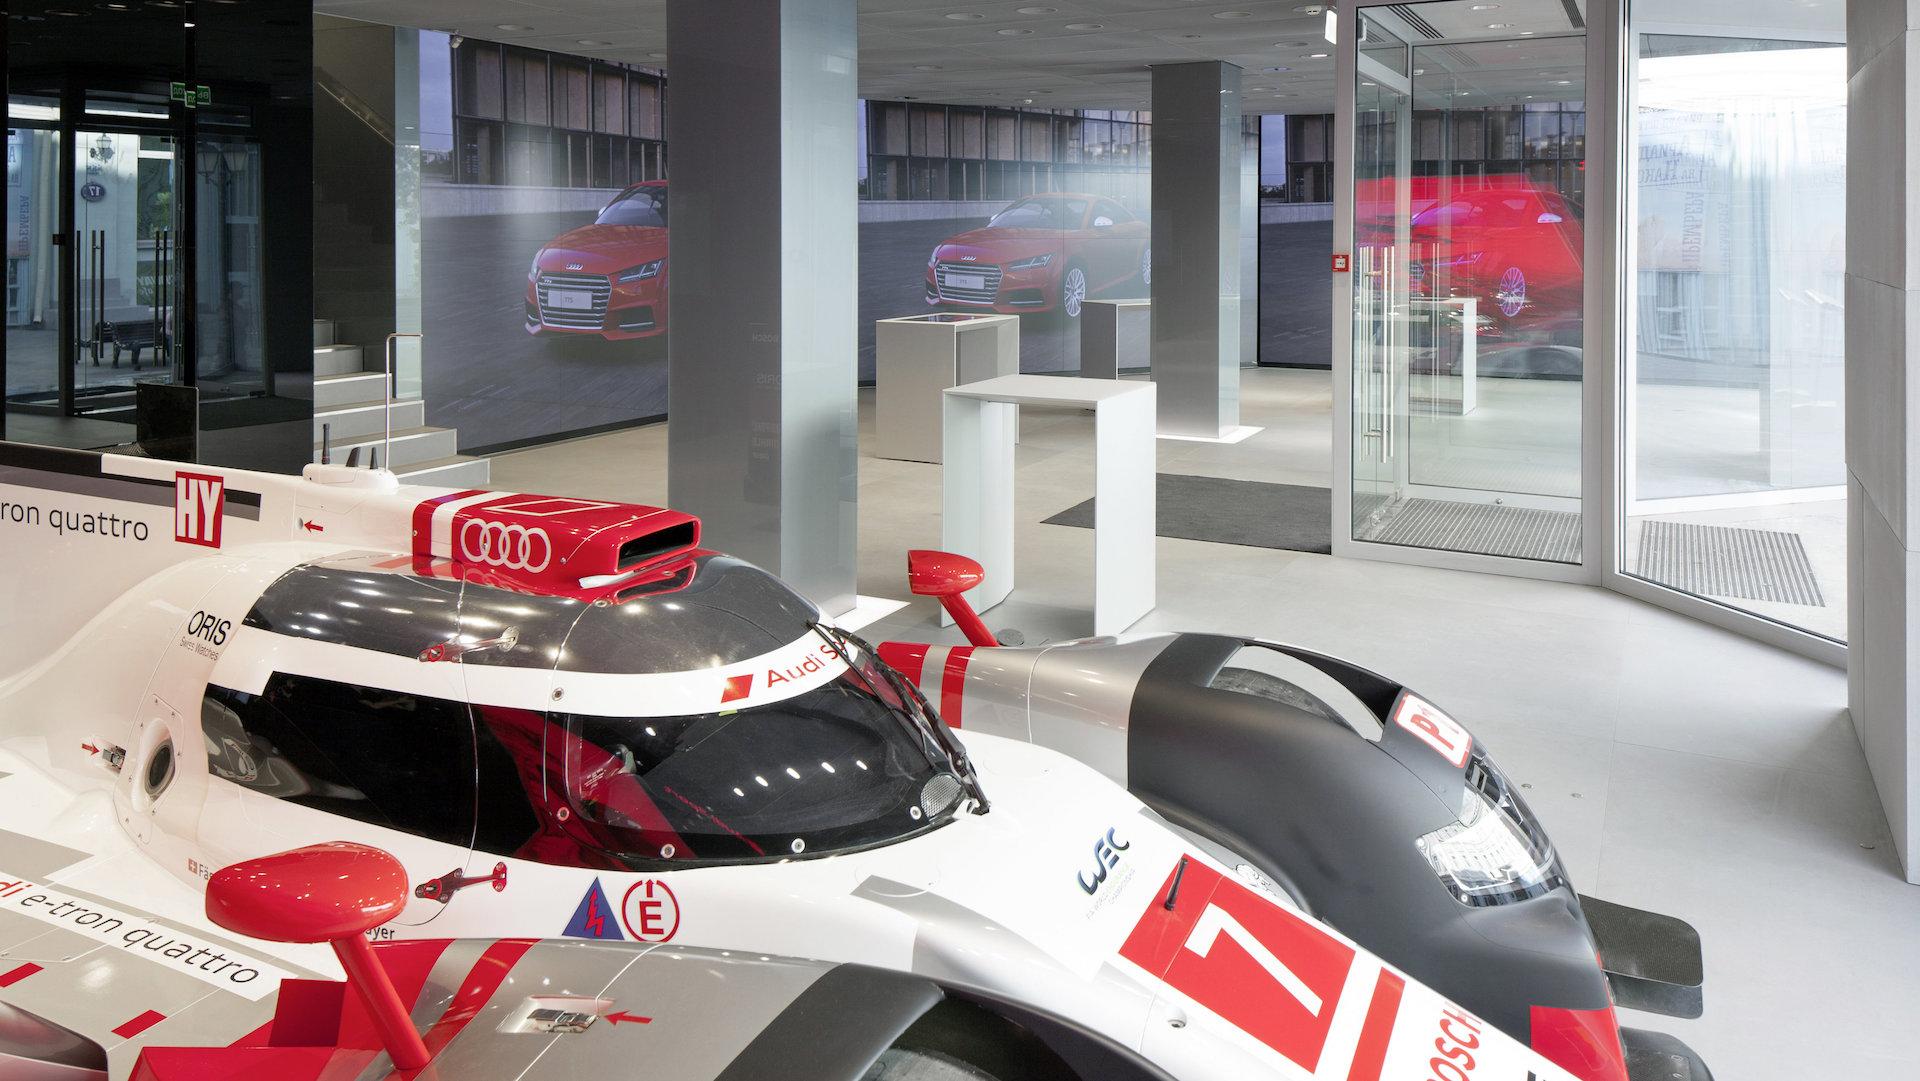 Audi City Moscow